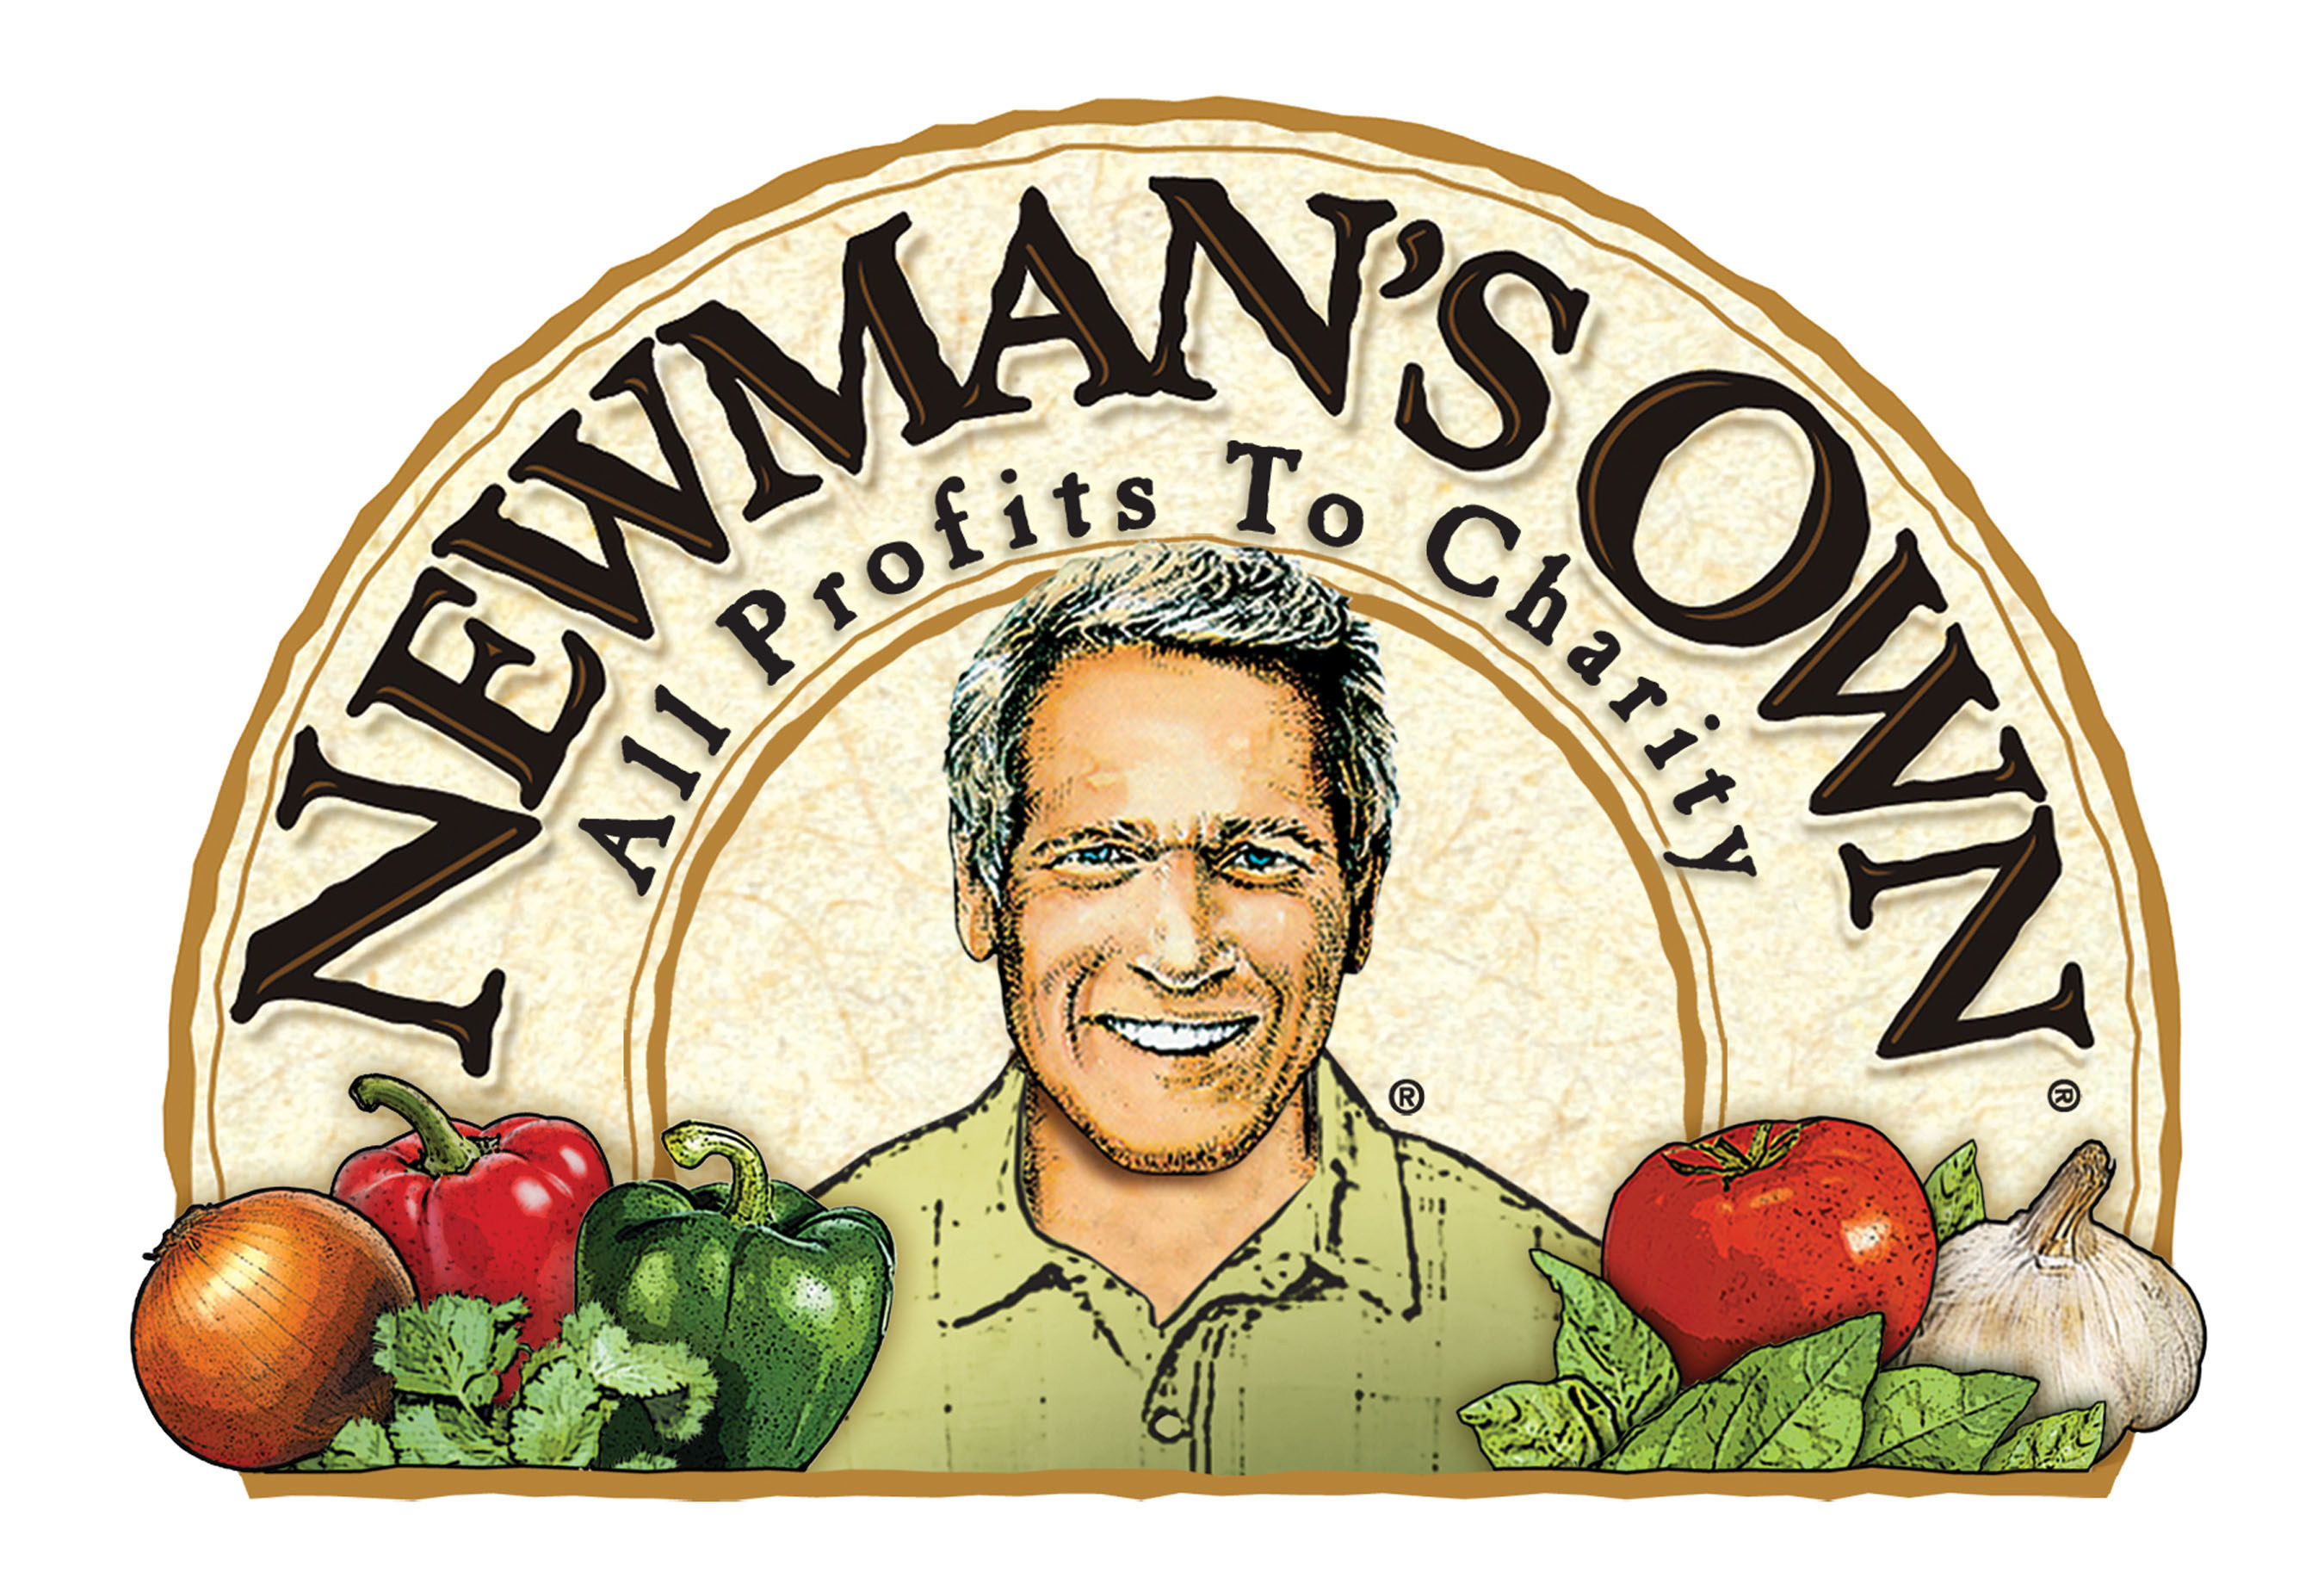 Newman's Own salad dressing serves up first-ever "Greens for Good" recipe contest. Enter at www.facebook.com/NewmansOwn